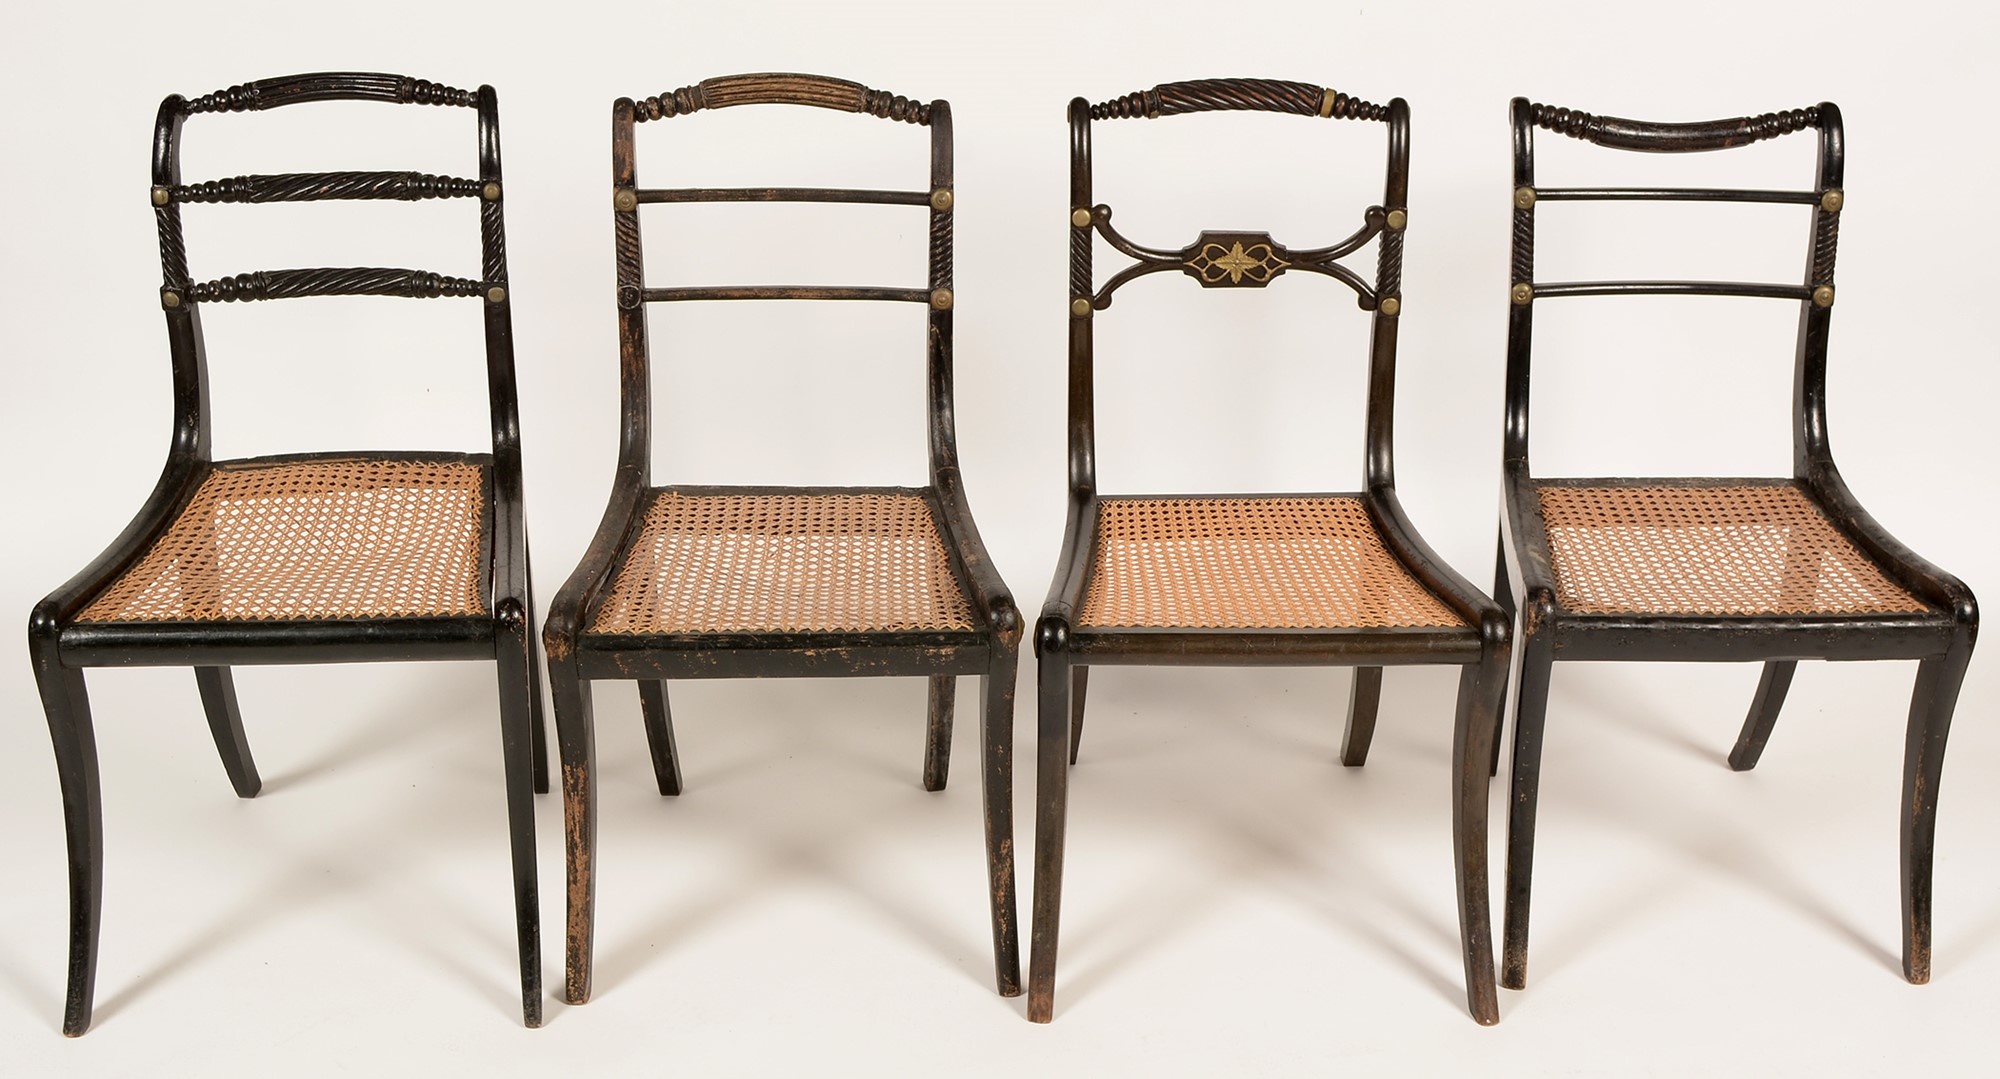 Eleven Regency and later dining chairs - Image 6 of 7